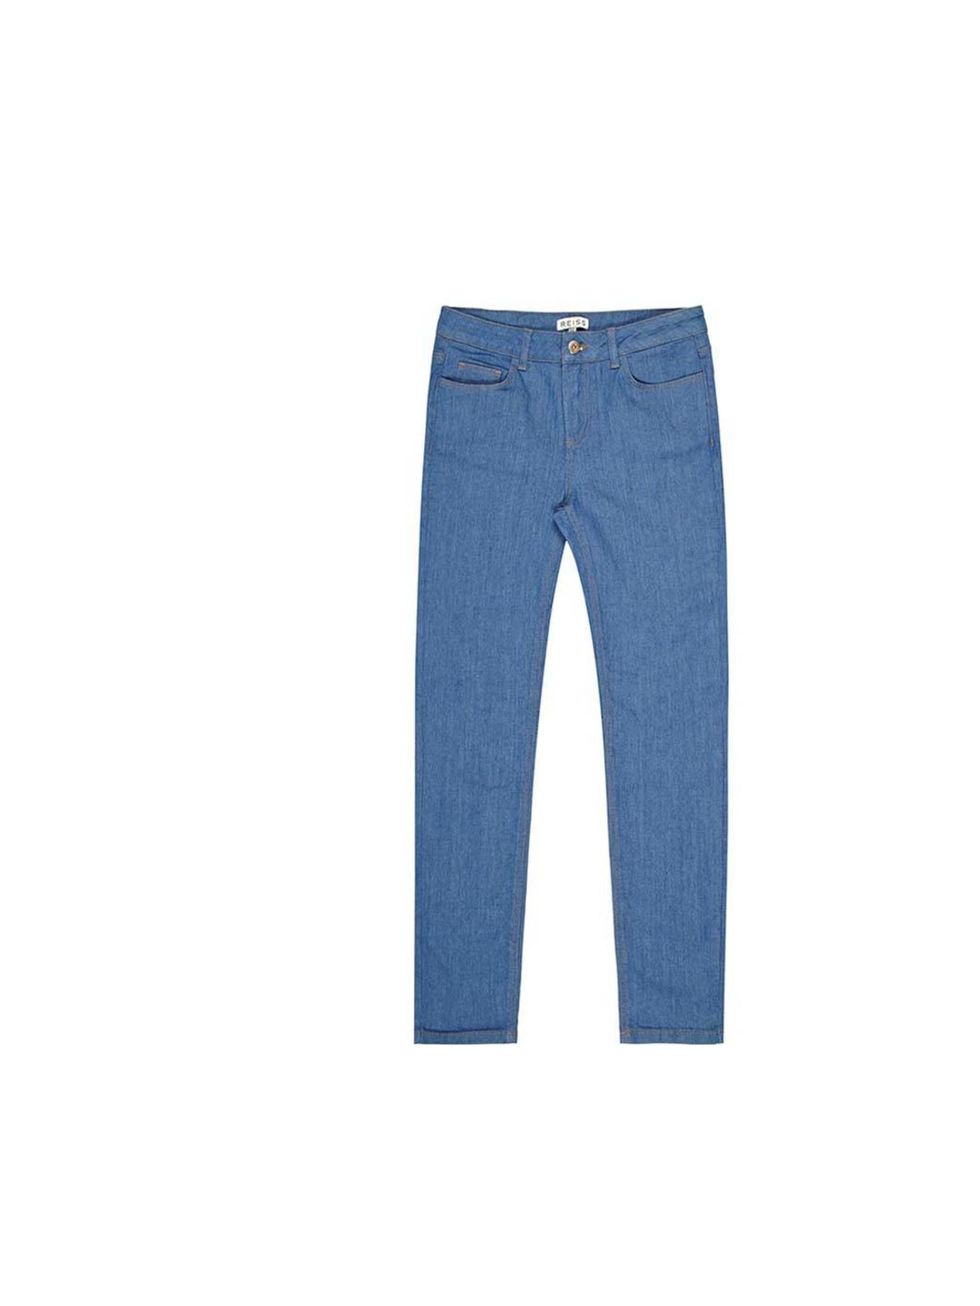 <p>They say imitation is the sincerest form of flattery - so pair these with heels and an oversized white top in homage to Debbie Morgan, ELLE's Editorial Business Manager.</p><p><a href="http://www.reiss.com/womens/jeans/smith-cropped/french-blue/">Reiss